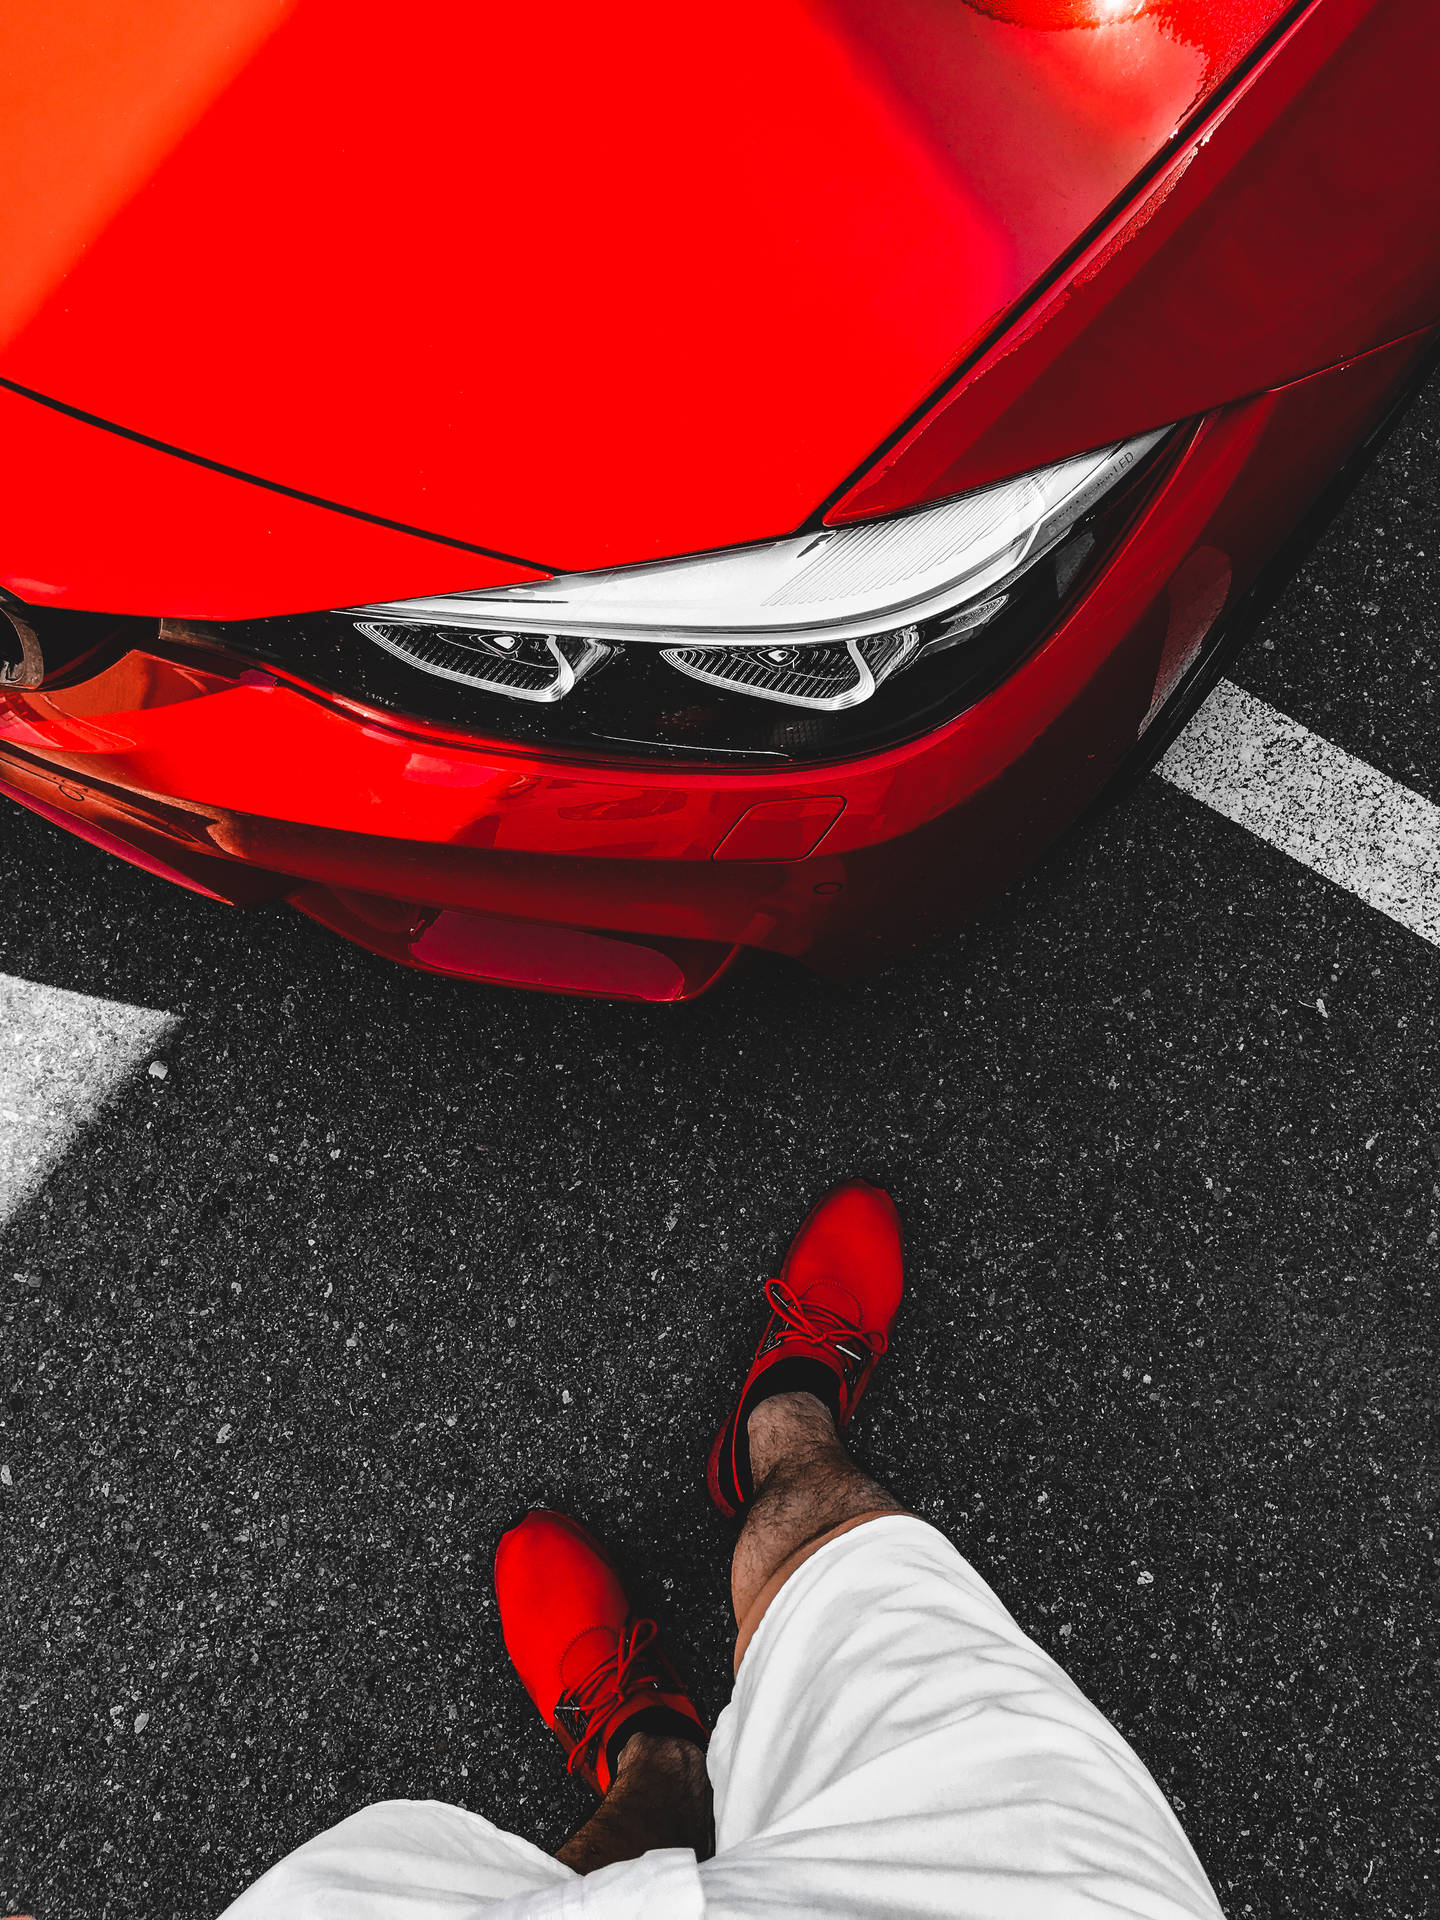 Iphone 8 Red Shoes And Car